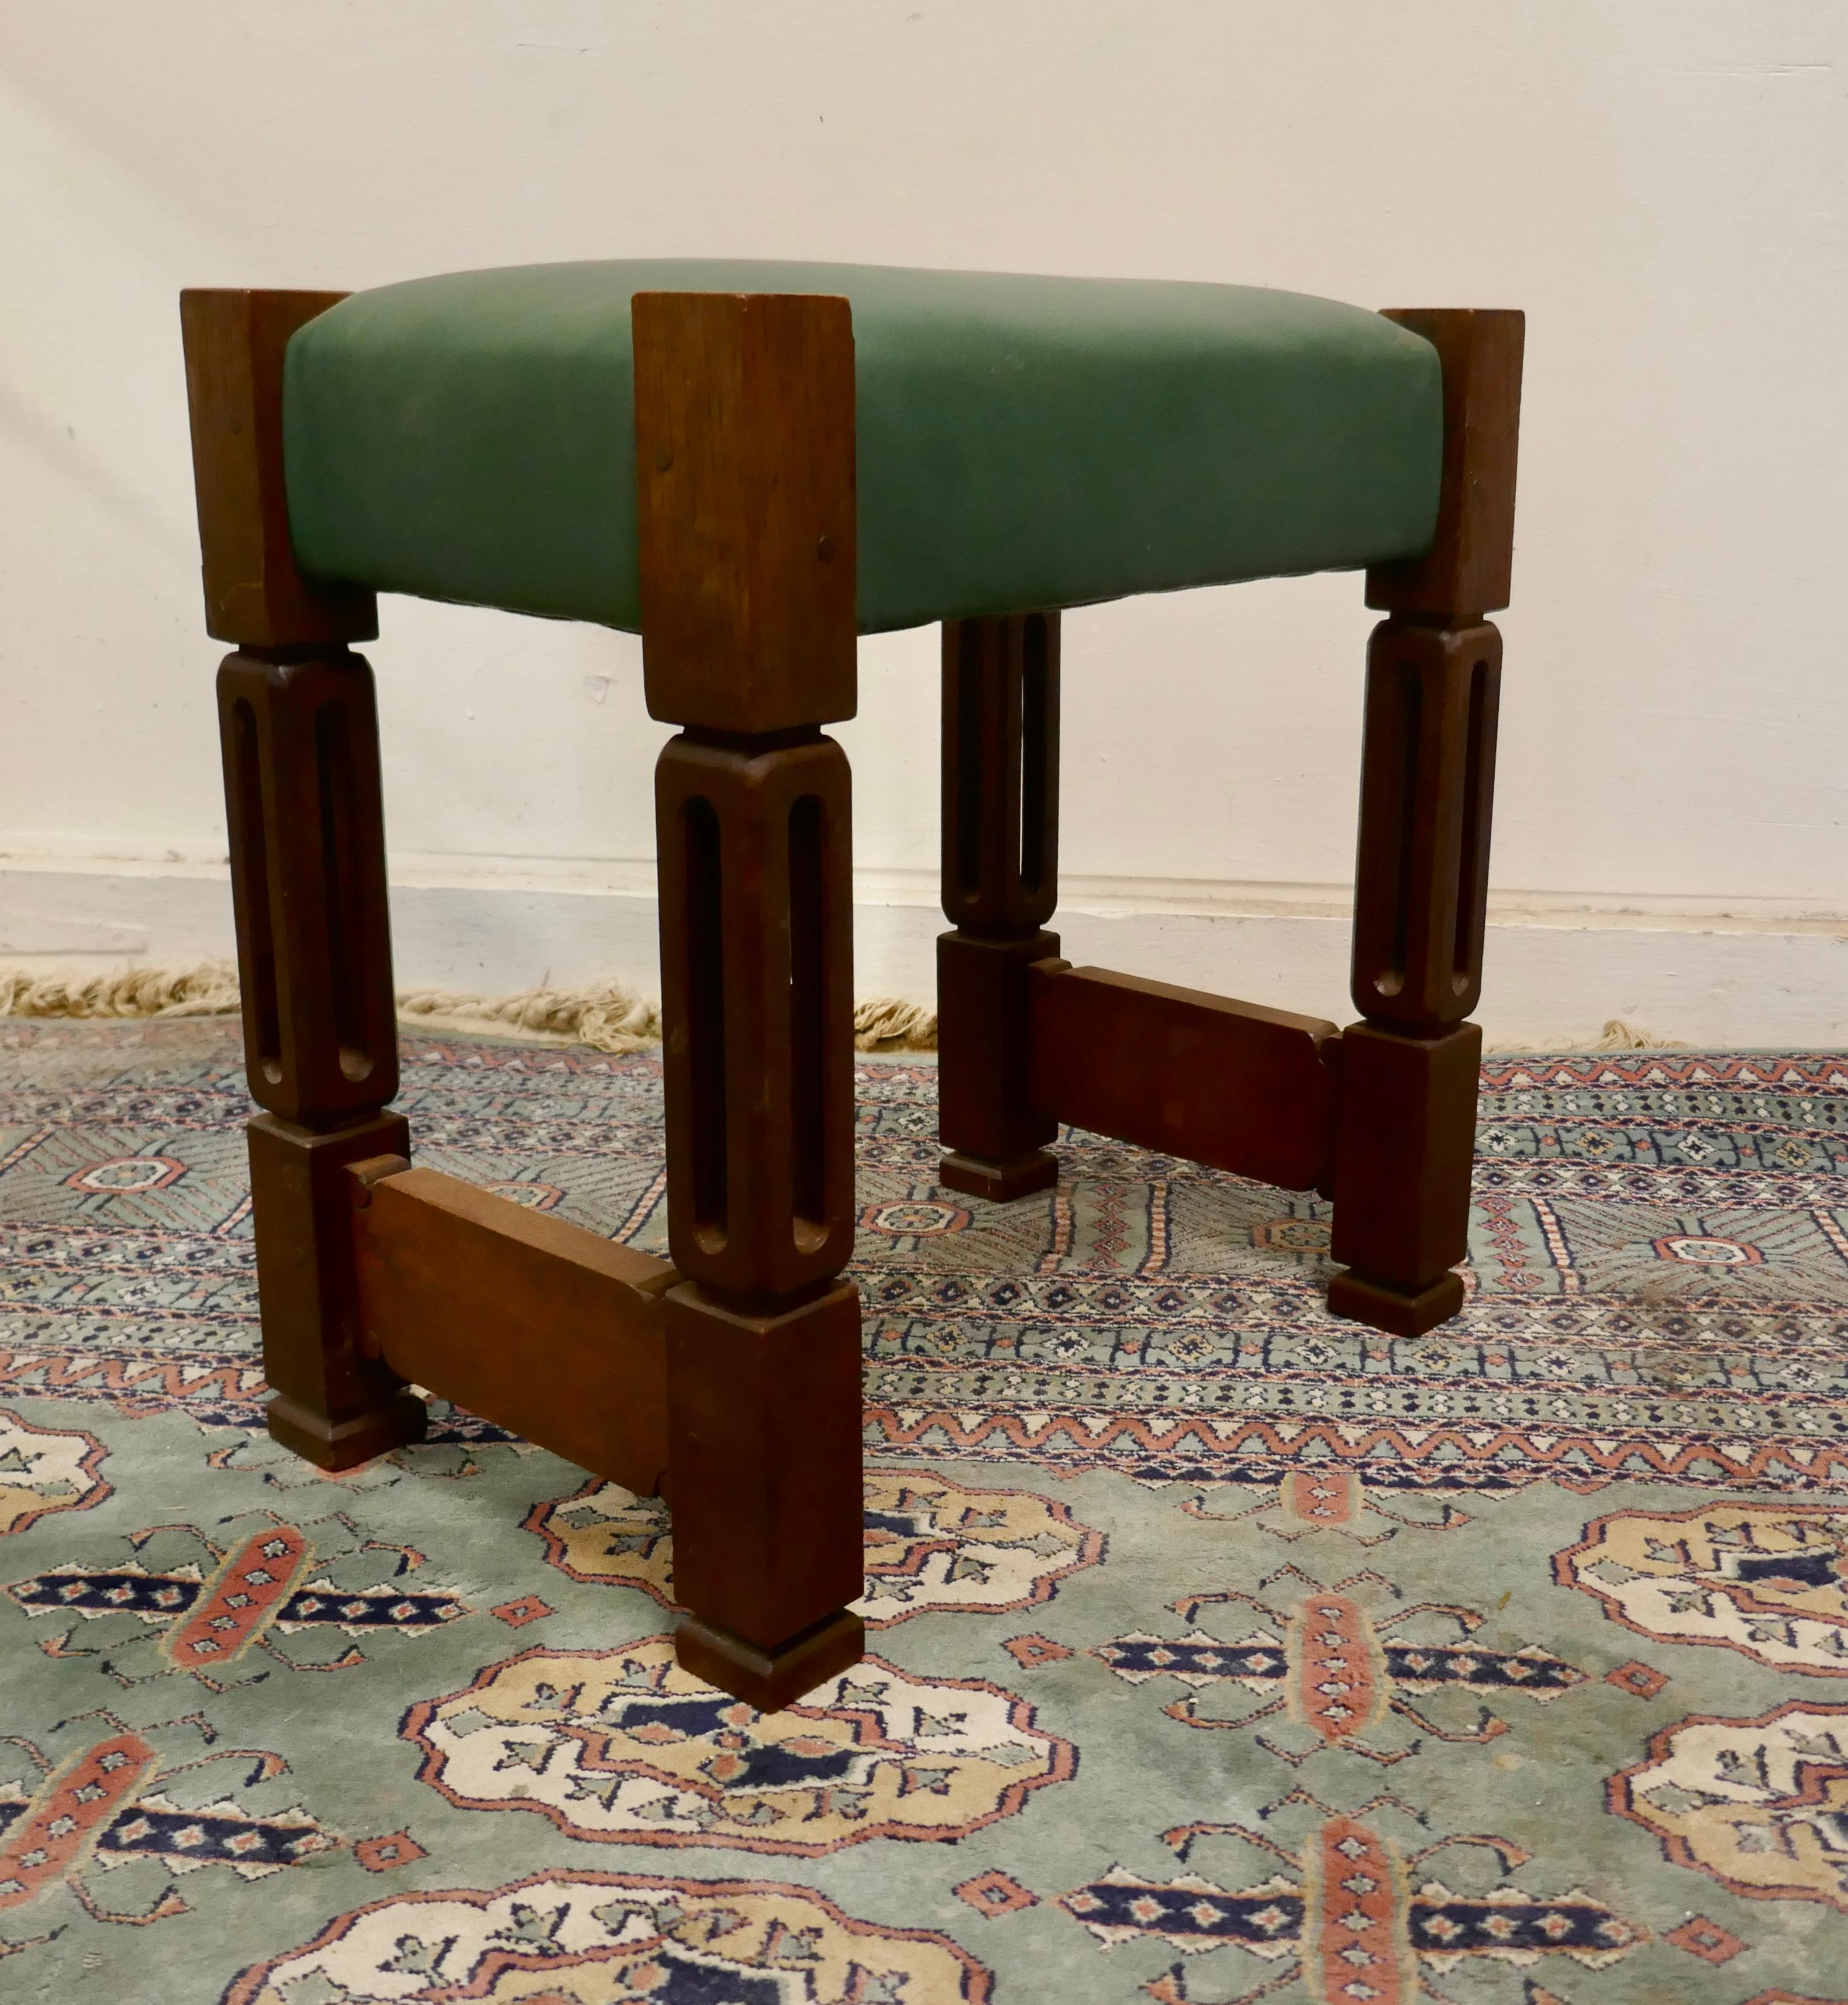 Stylish Arts and Crafts Oak and Leather Stool 2